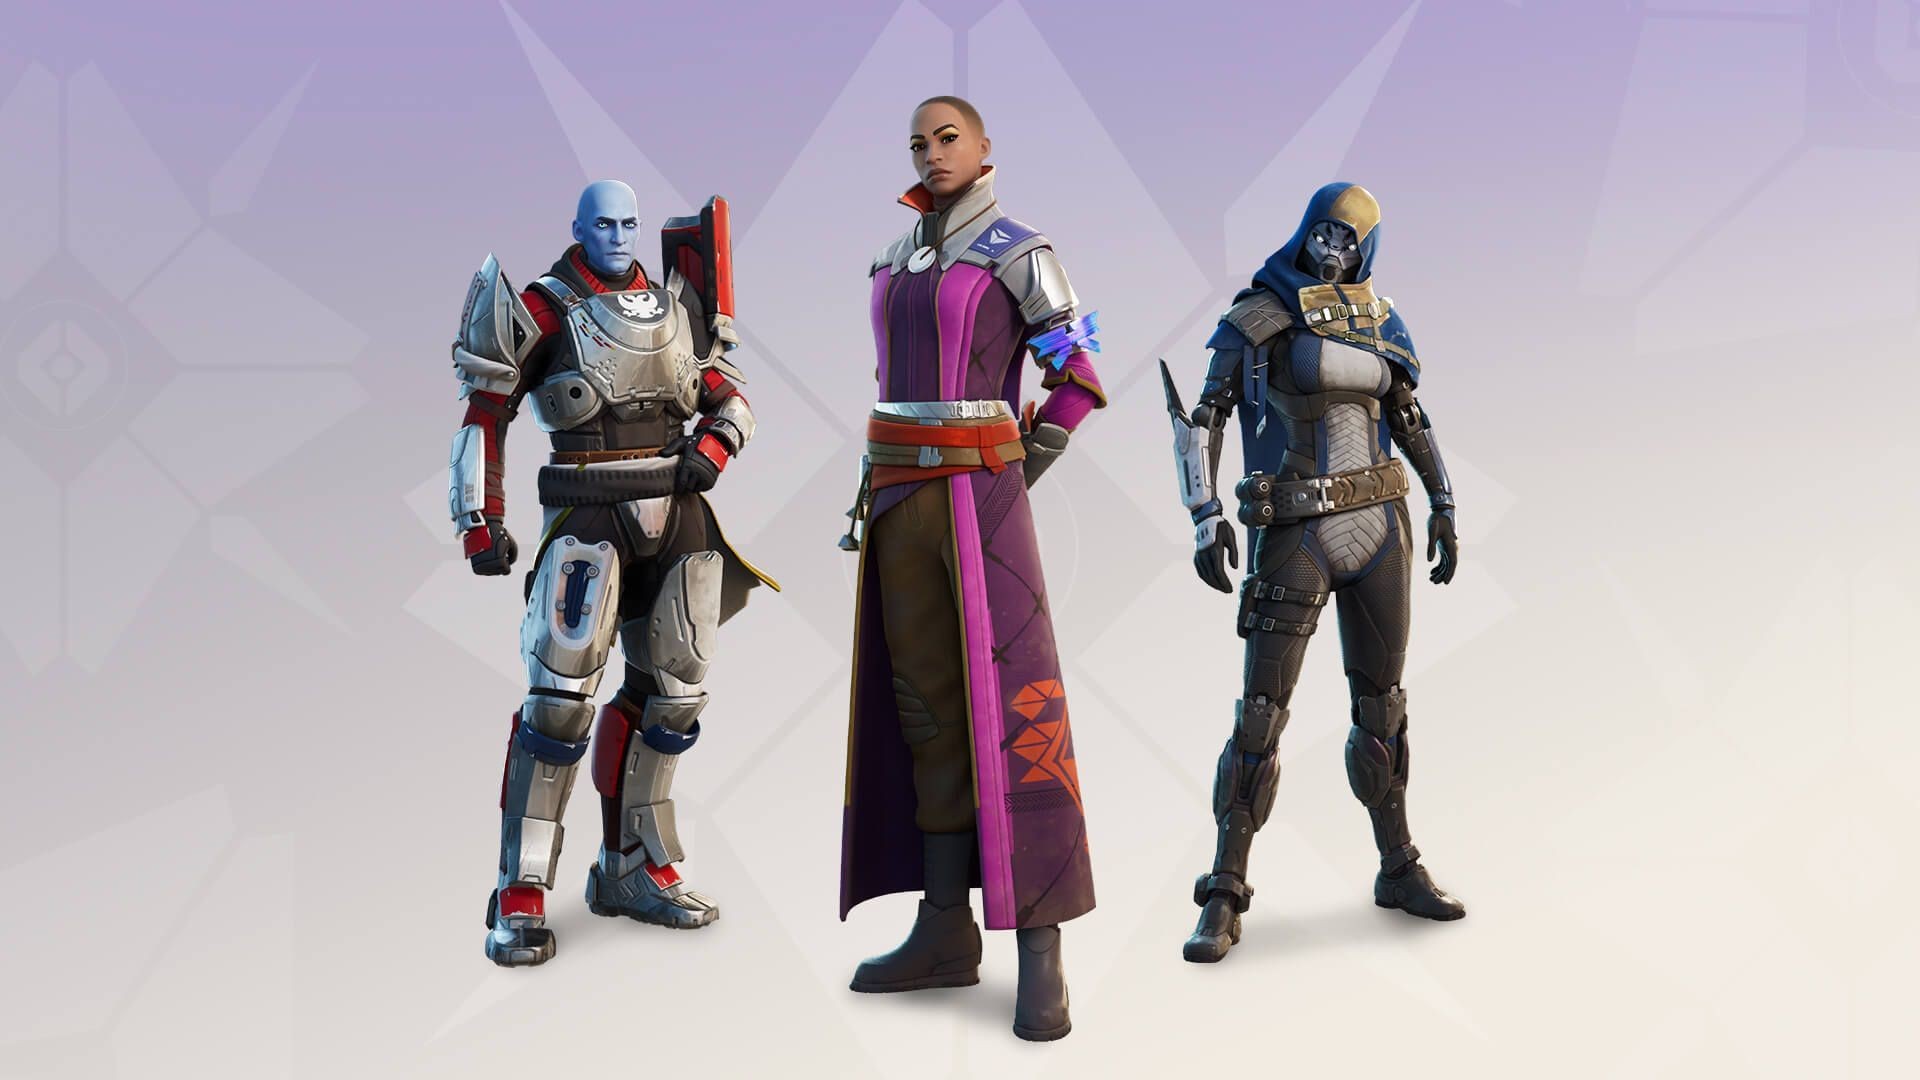 How To Get Destiny 2 Skins in Fortnite